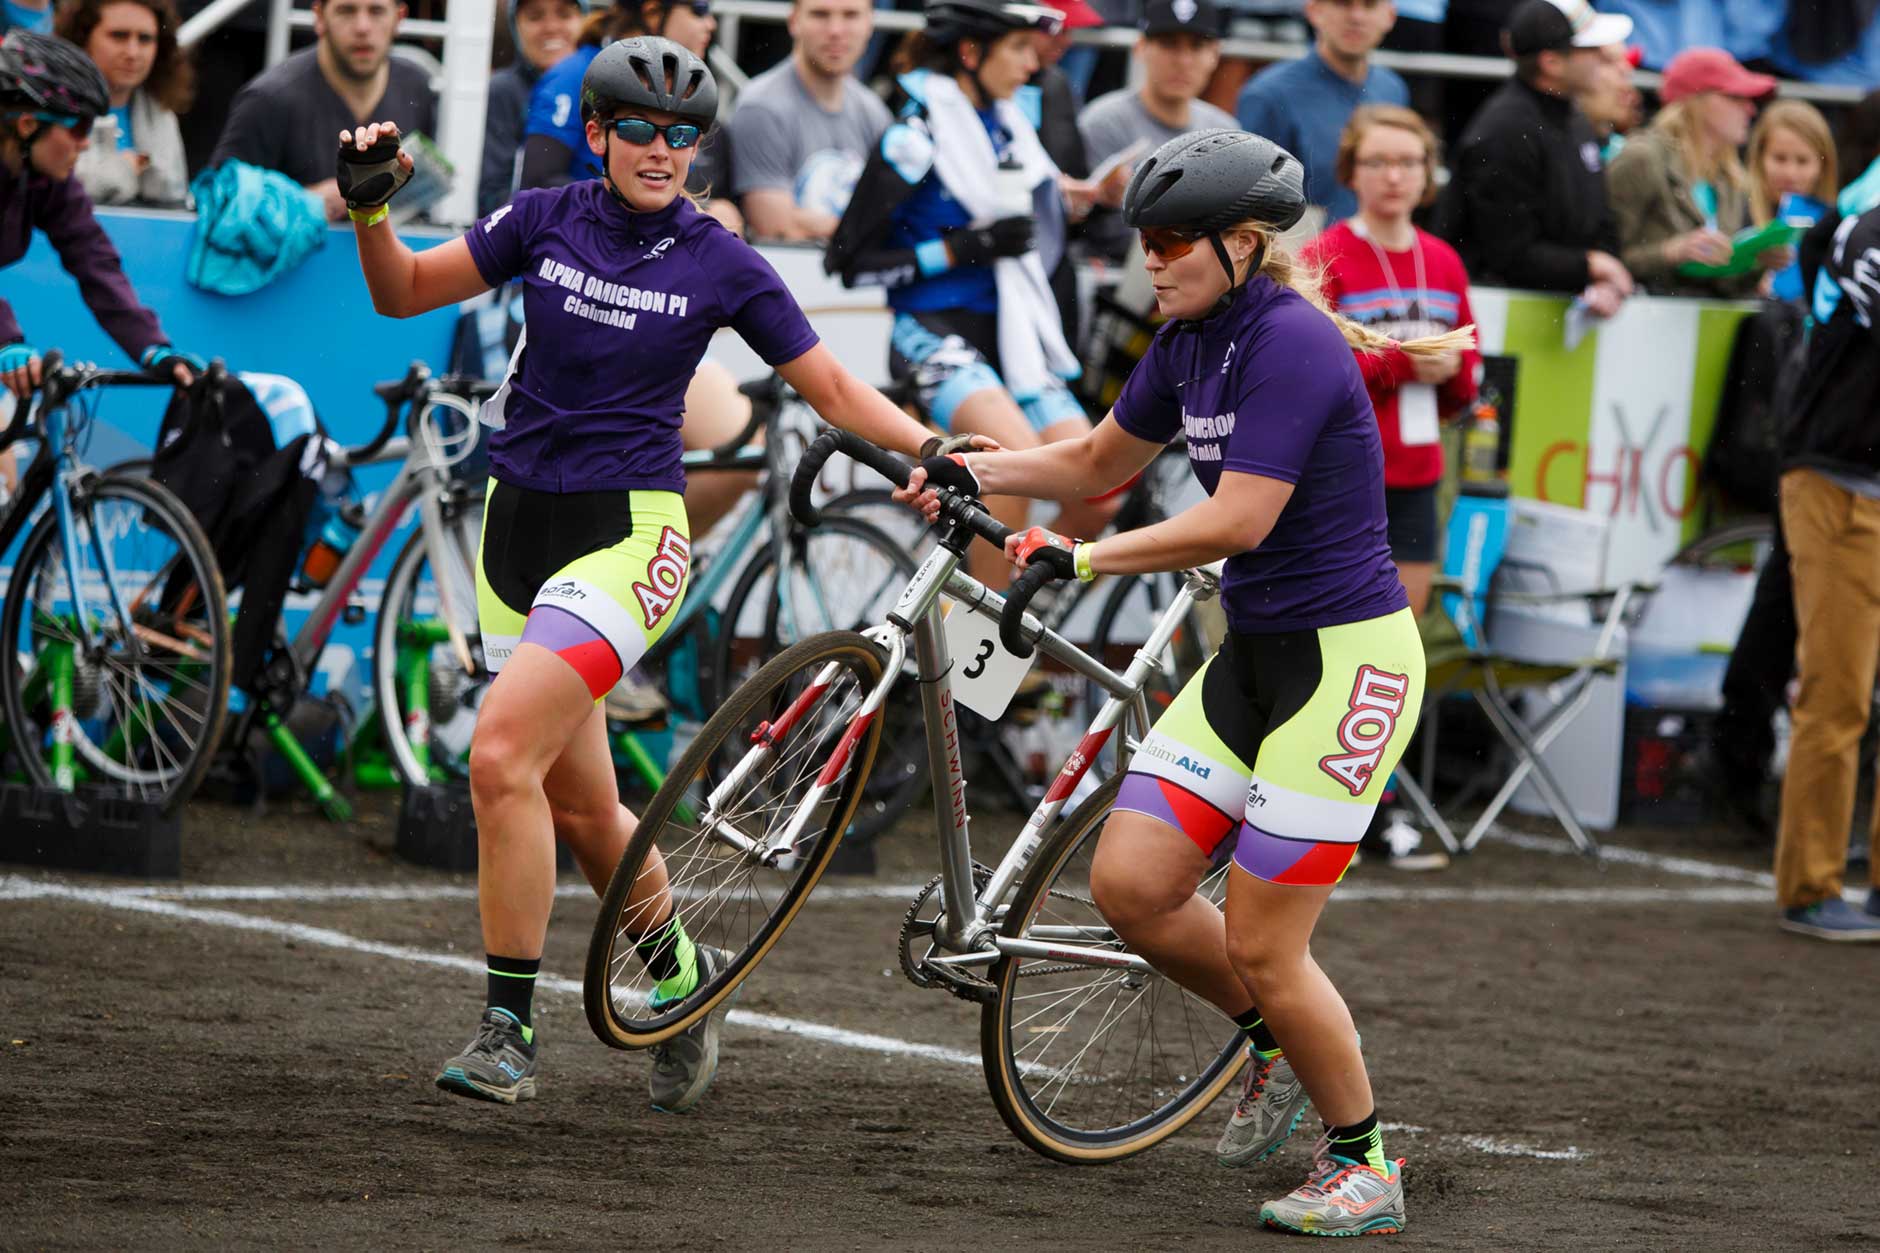 Alpha Omicron Pi's Ali Oppel, left, exchanges with teammate Leigh Dukeman during the Women's Little 500 at Bill Armstrong Stadium on Friday, April 21, 2017. (James Brosher/IU Communications)